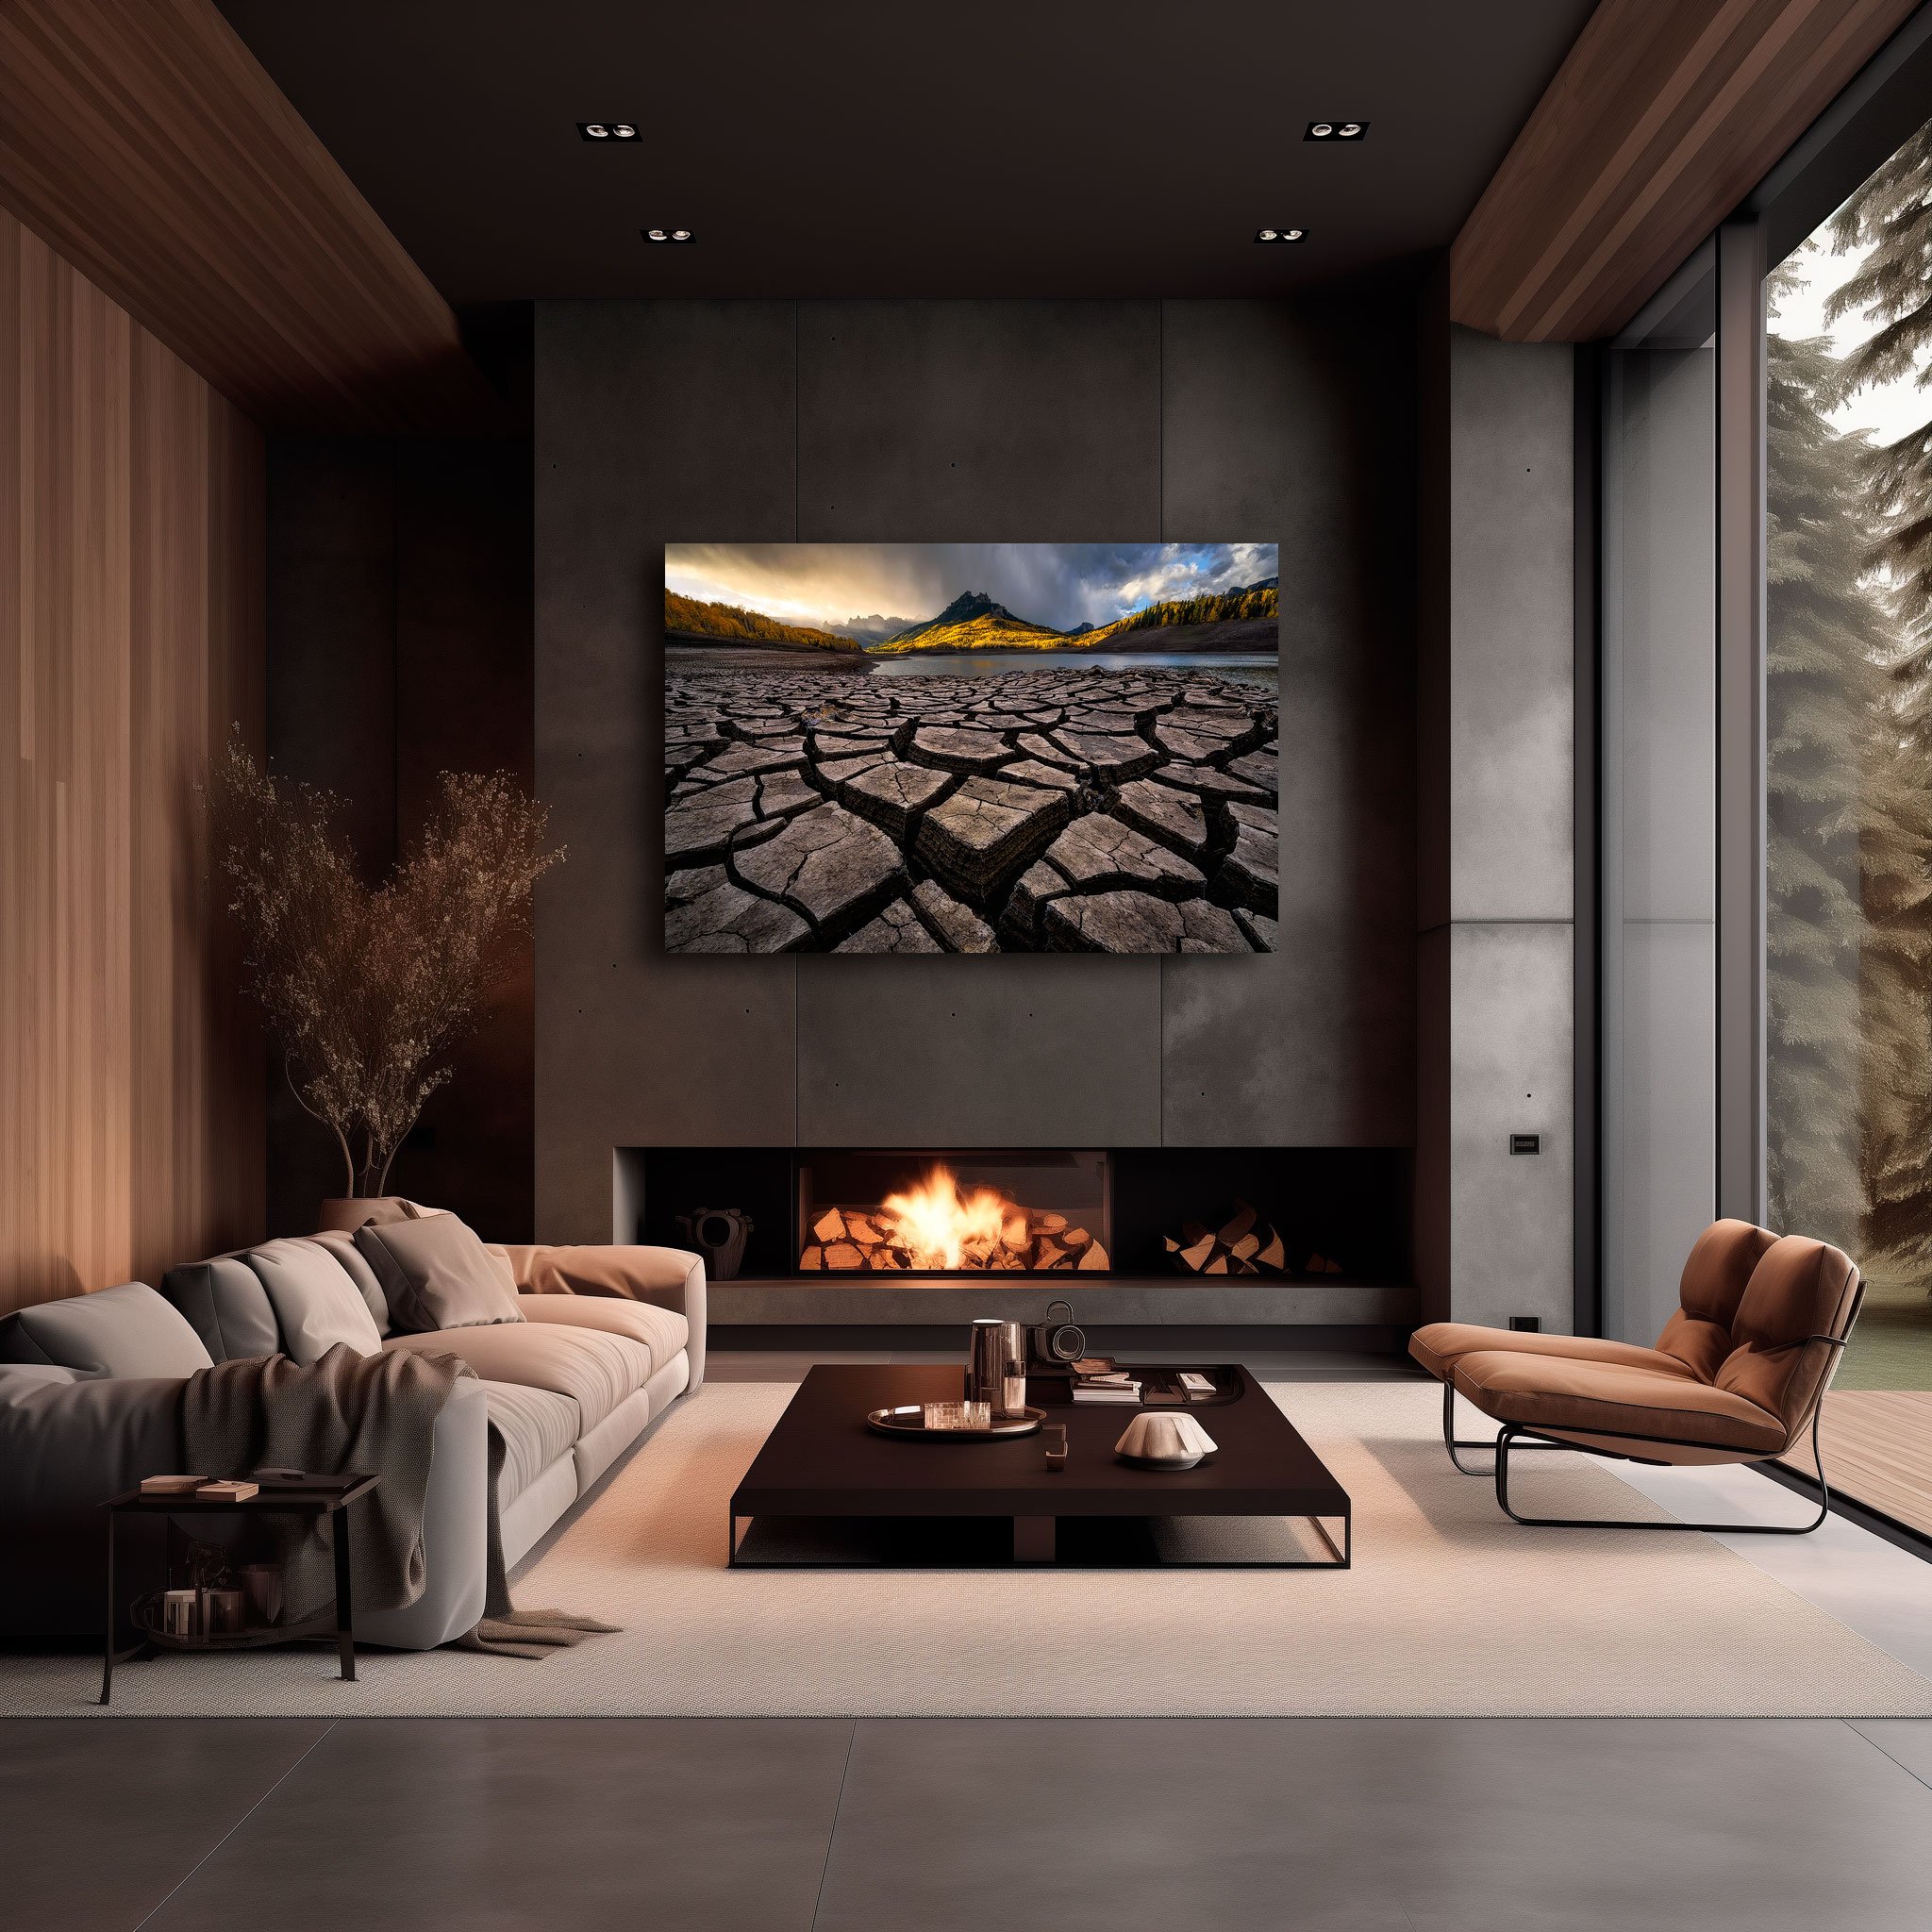 Ends-Of-The-Earth-Fine-Art-Print-Home-Interior.jpg